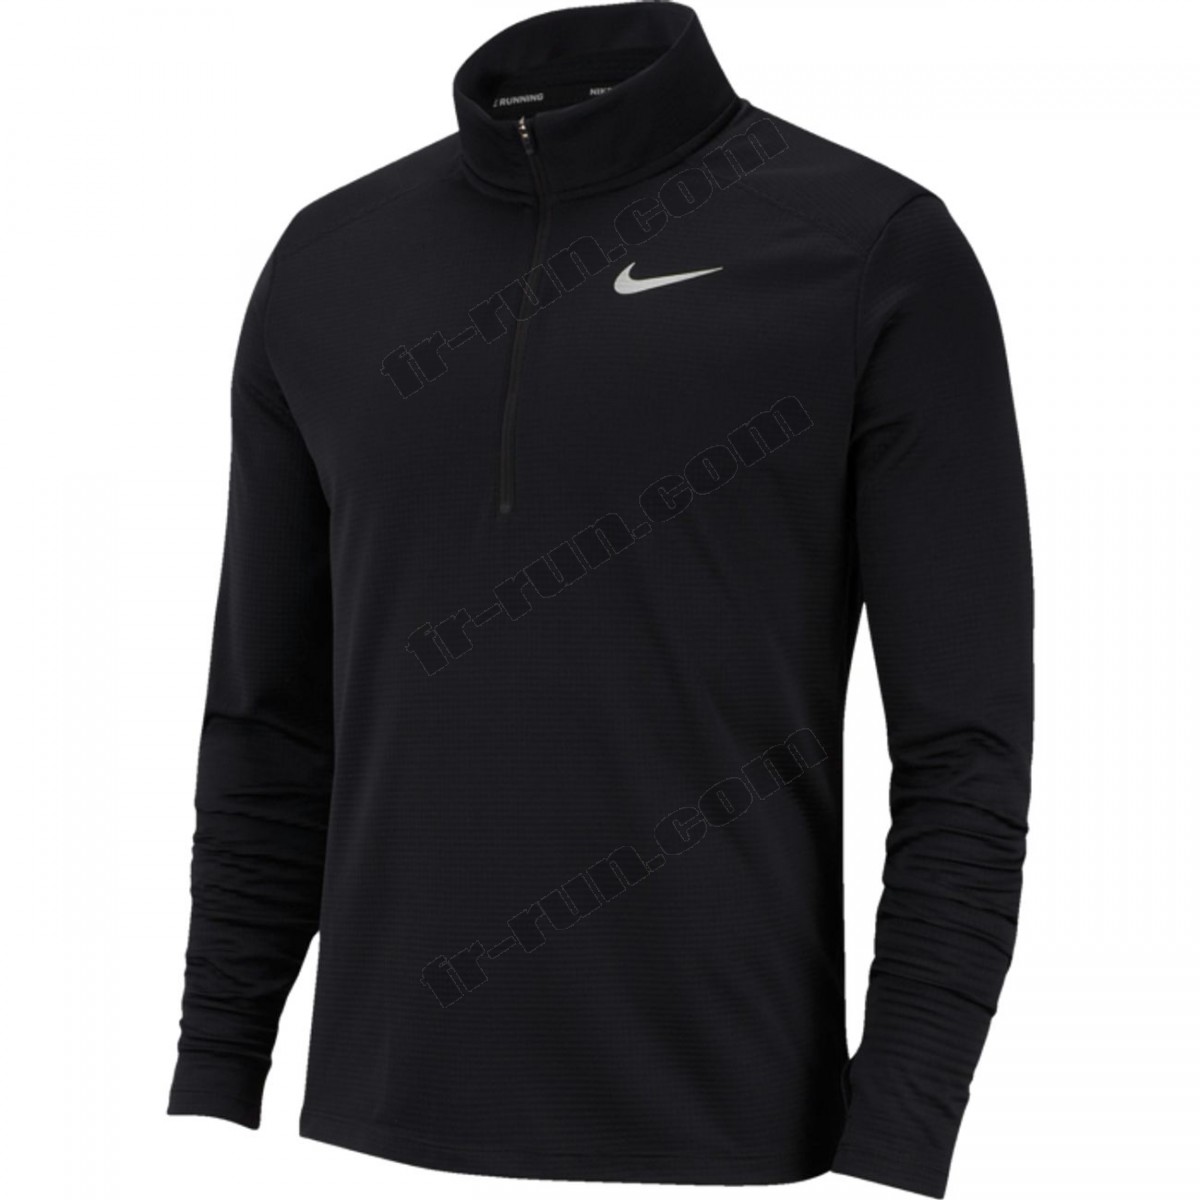 Nike/HAUT running homme NIKE M NK PACER TOP HZ √ Nouveau style √ Soldes - -0